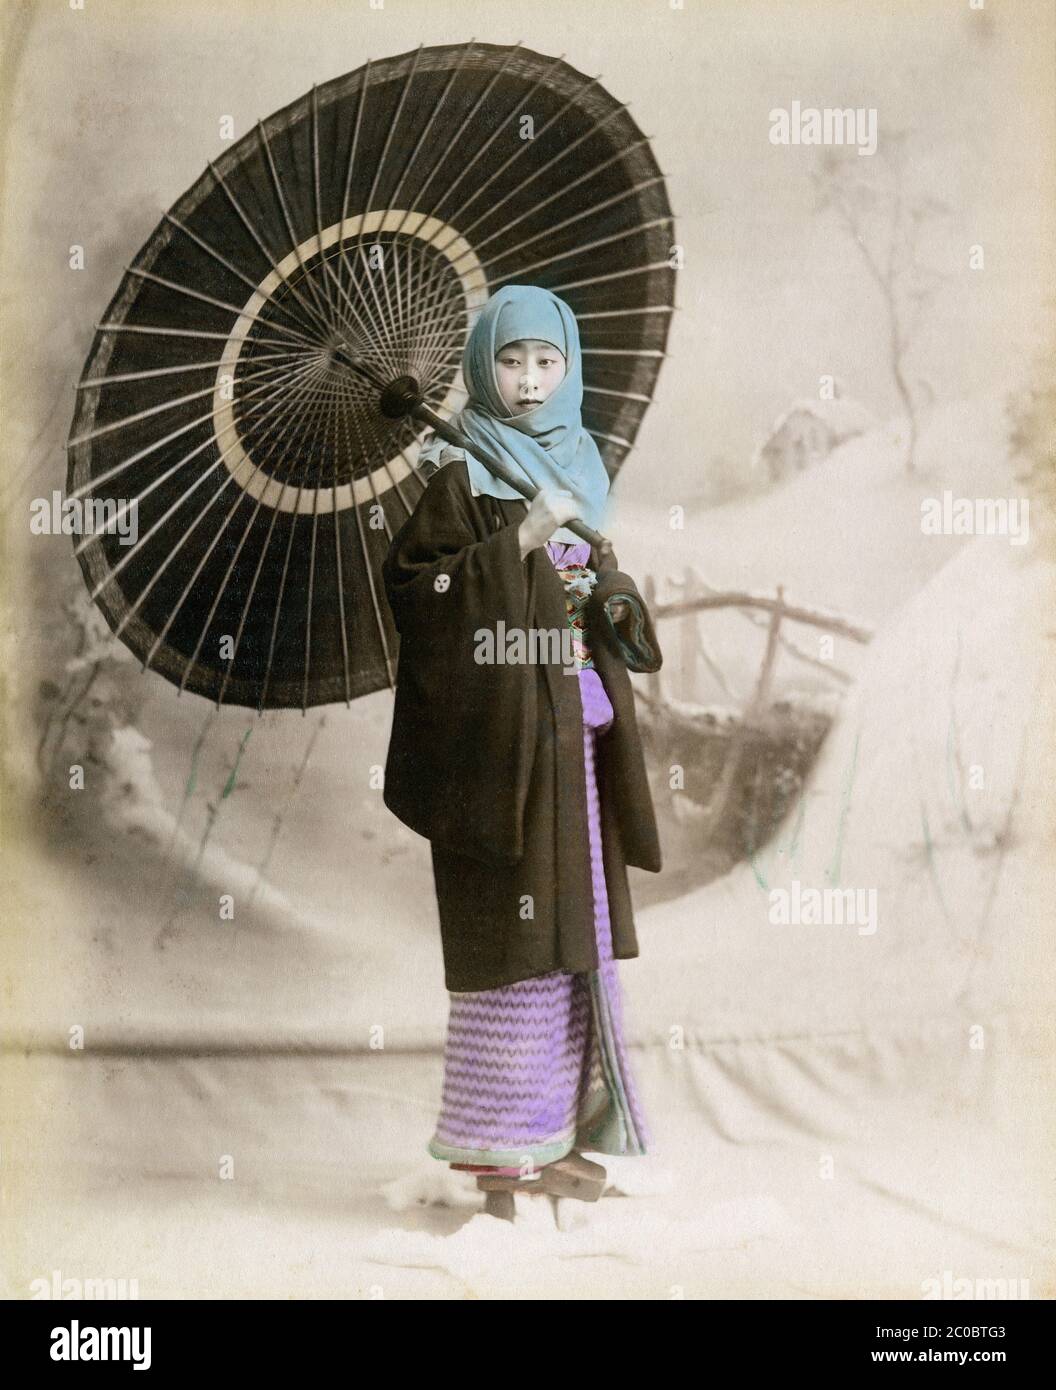 [ 1890s Japan - Woman in Winter Outfit ] — A young Japanese woman in a thick winter kimono has an okosozukin (御高祖頭巾) wrapped around her head to protect herself against the winter cold.  She is holding a paper parasol.  19th century vintage albumen photograph. Stock Photo